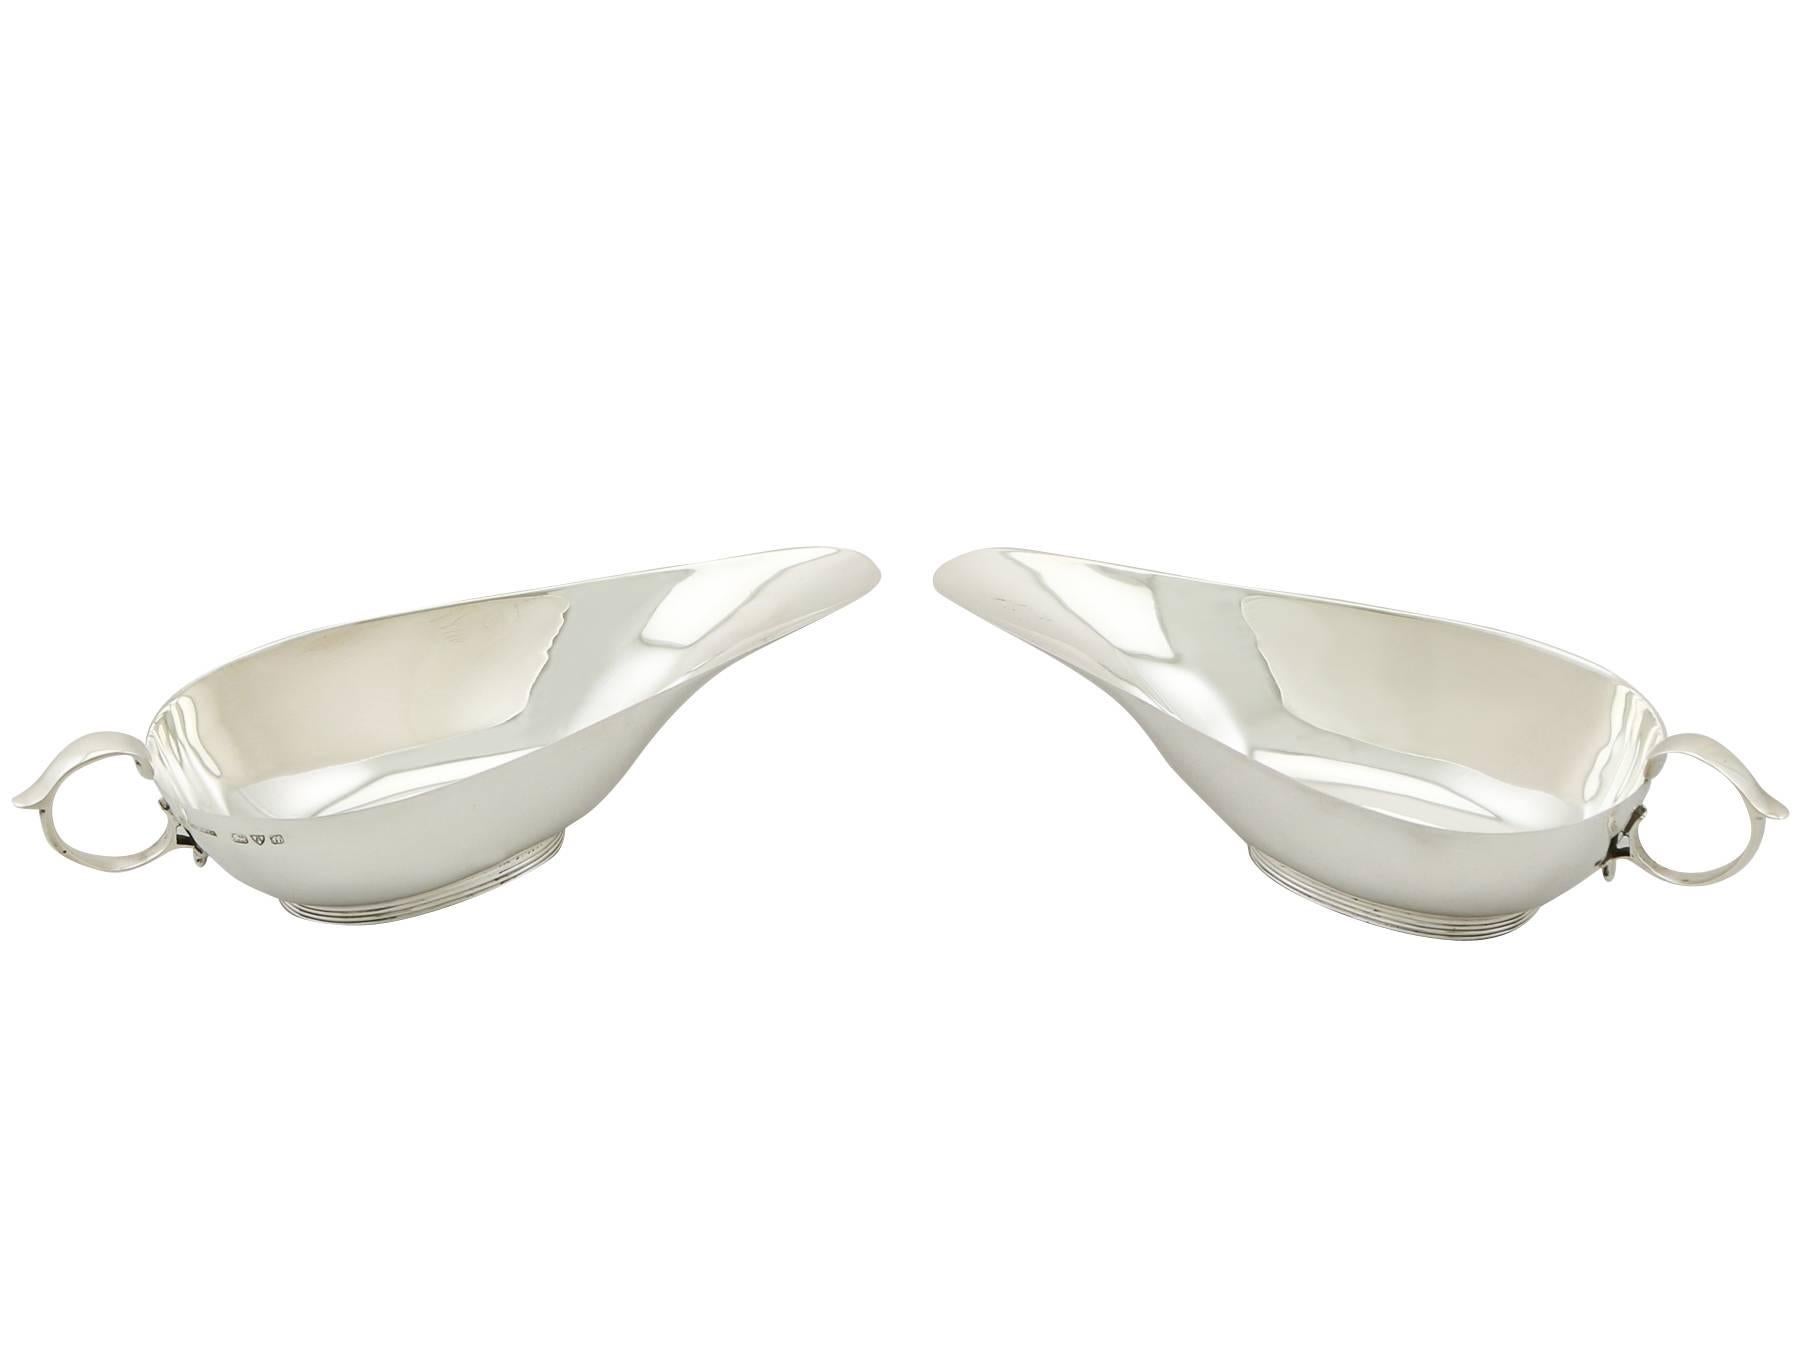 These fine antique George V sterling silver gravy boats have a plain rounded boat shaped form onto a ribbed oval foot.

The body of each piece is plain and unembellished.

These 1930s silver gravy boats are fitted with fine and impressive sterling